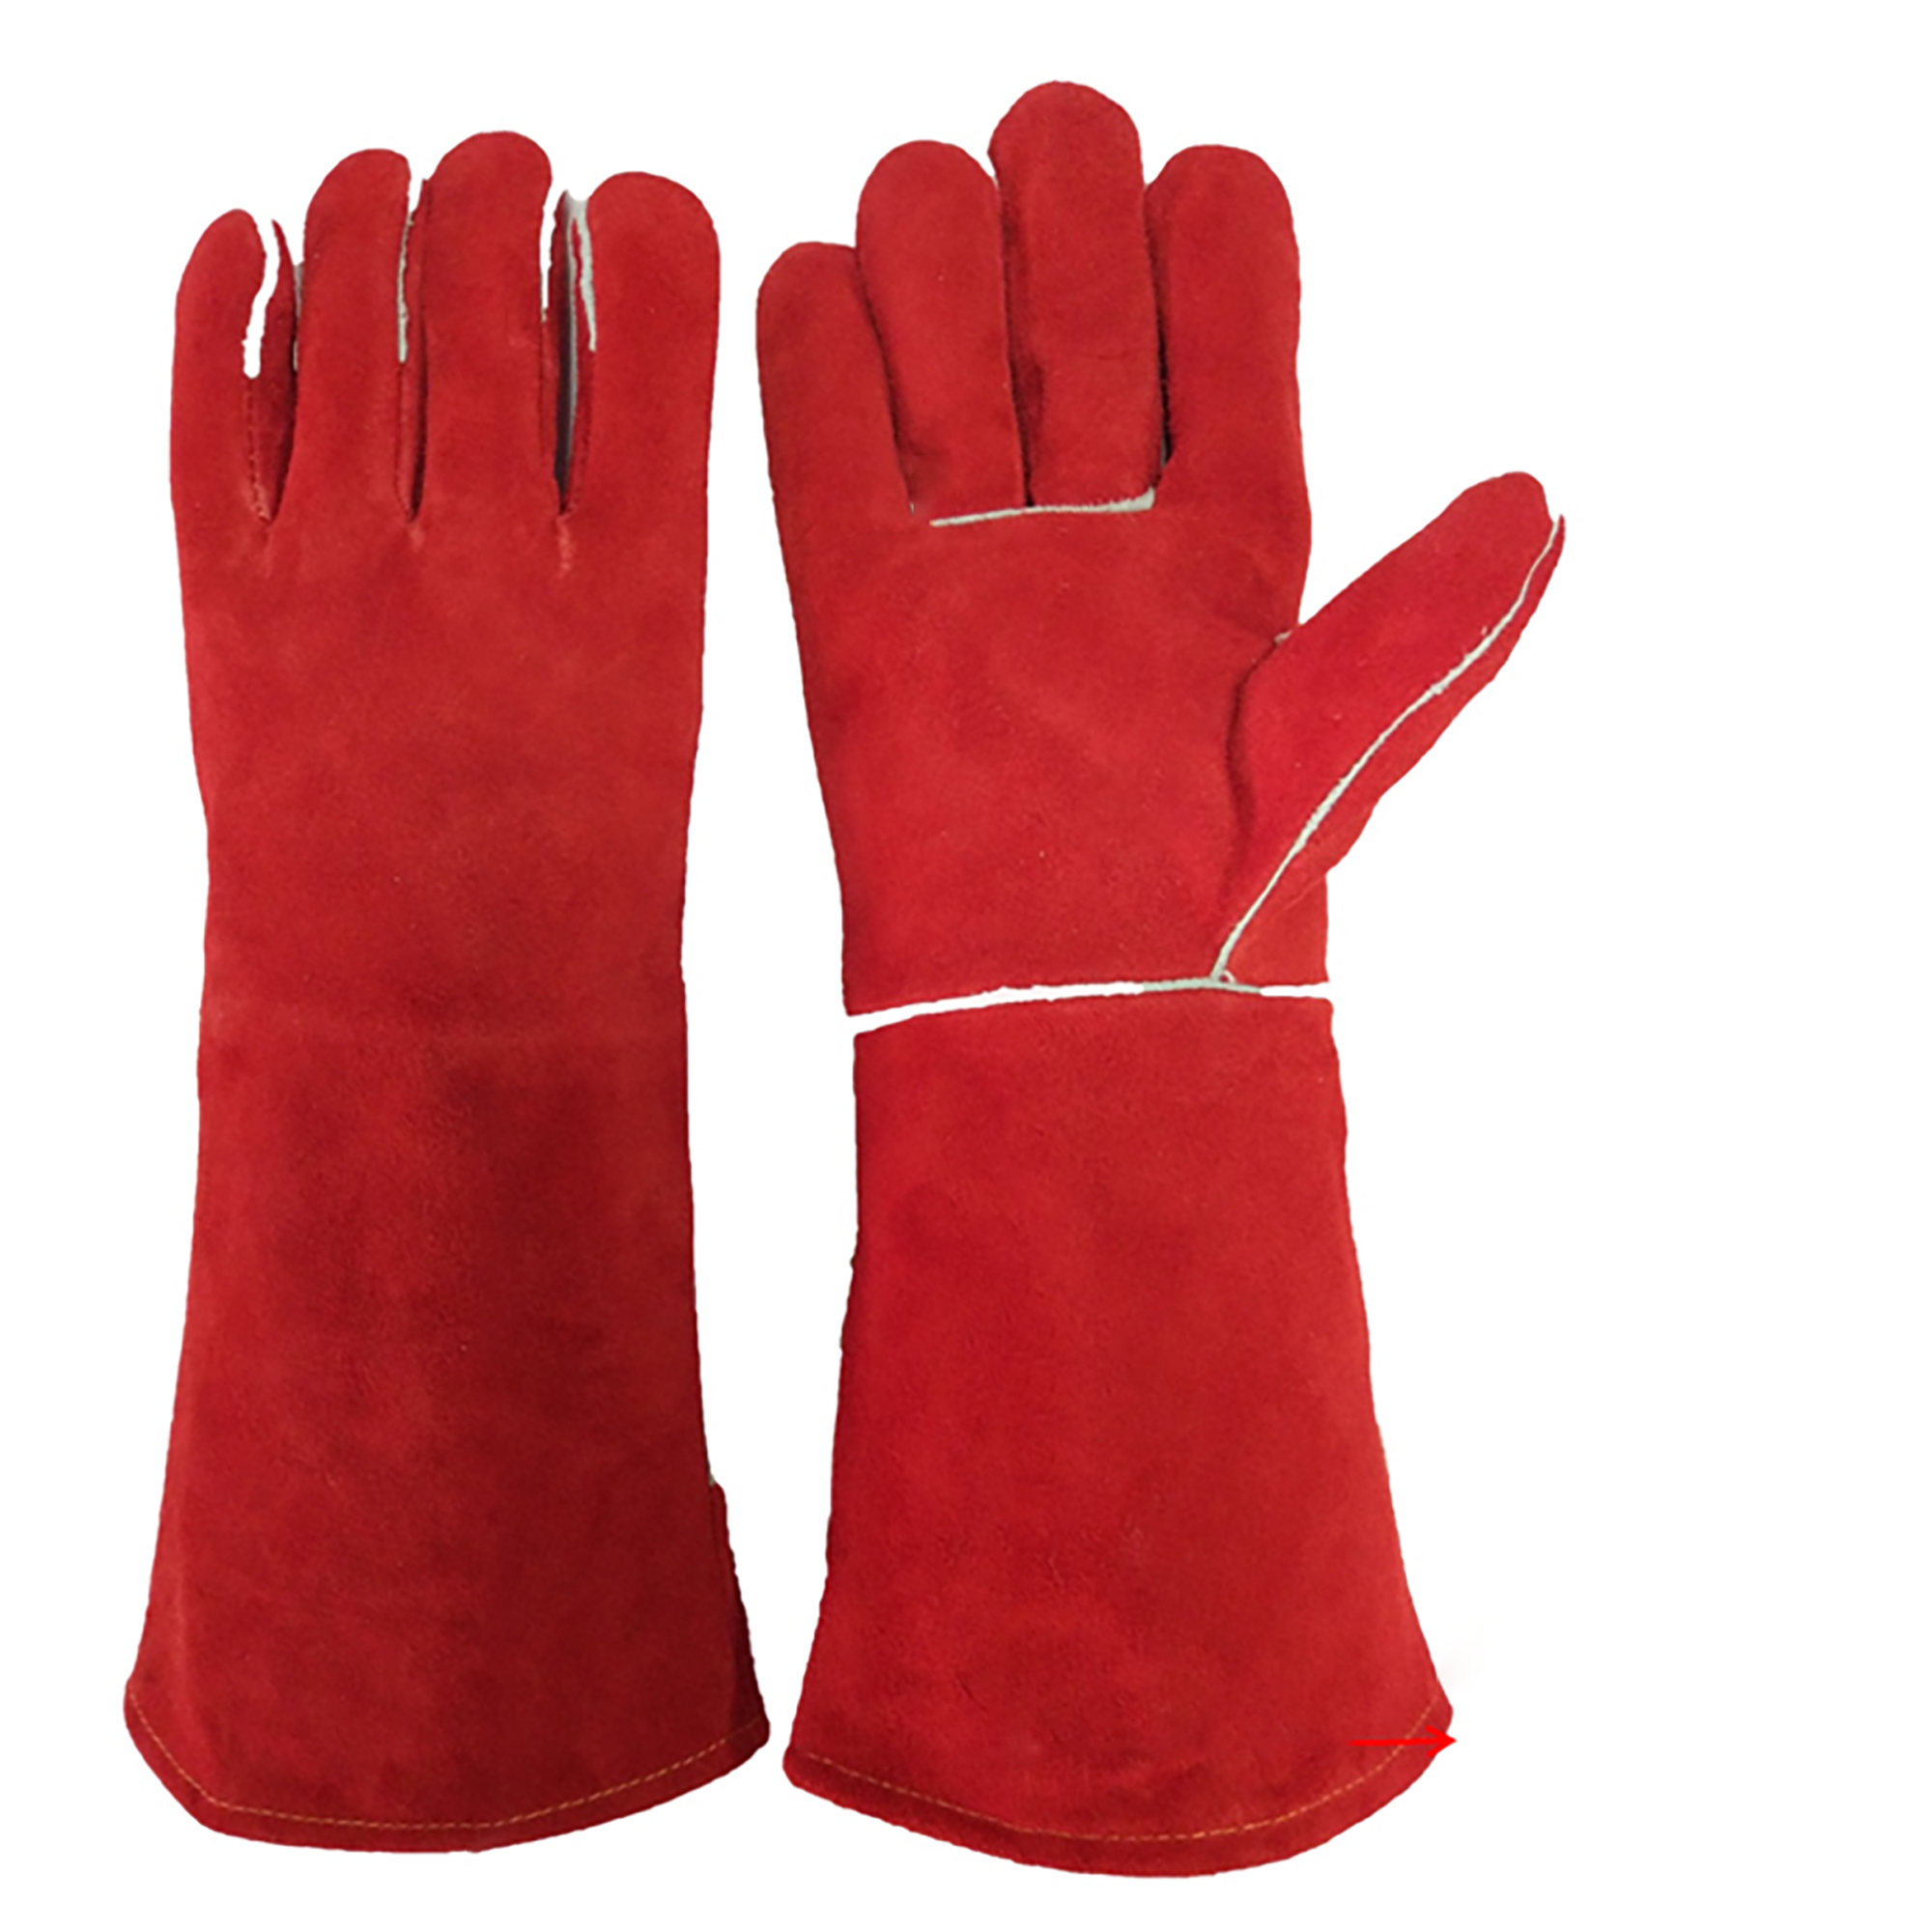 Welding Glove 16 Inch Heat Resistant Leather Red